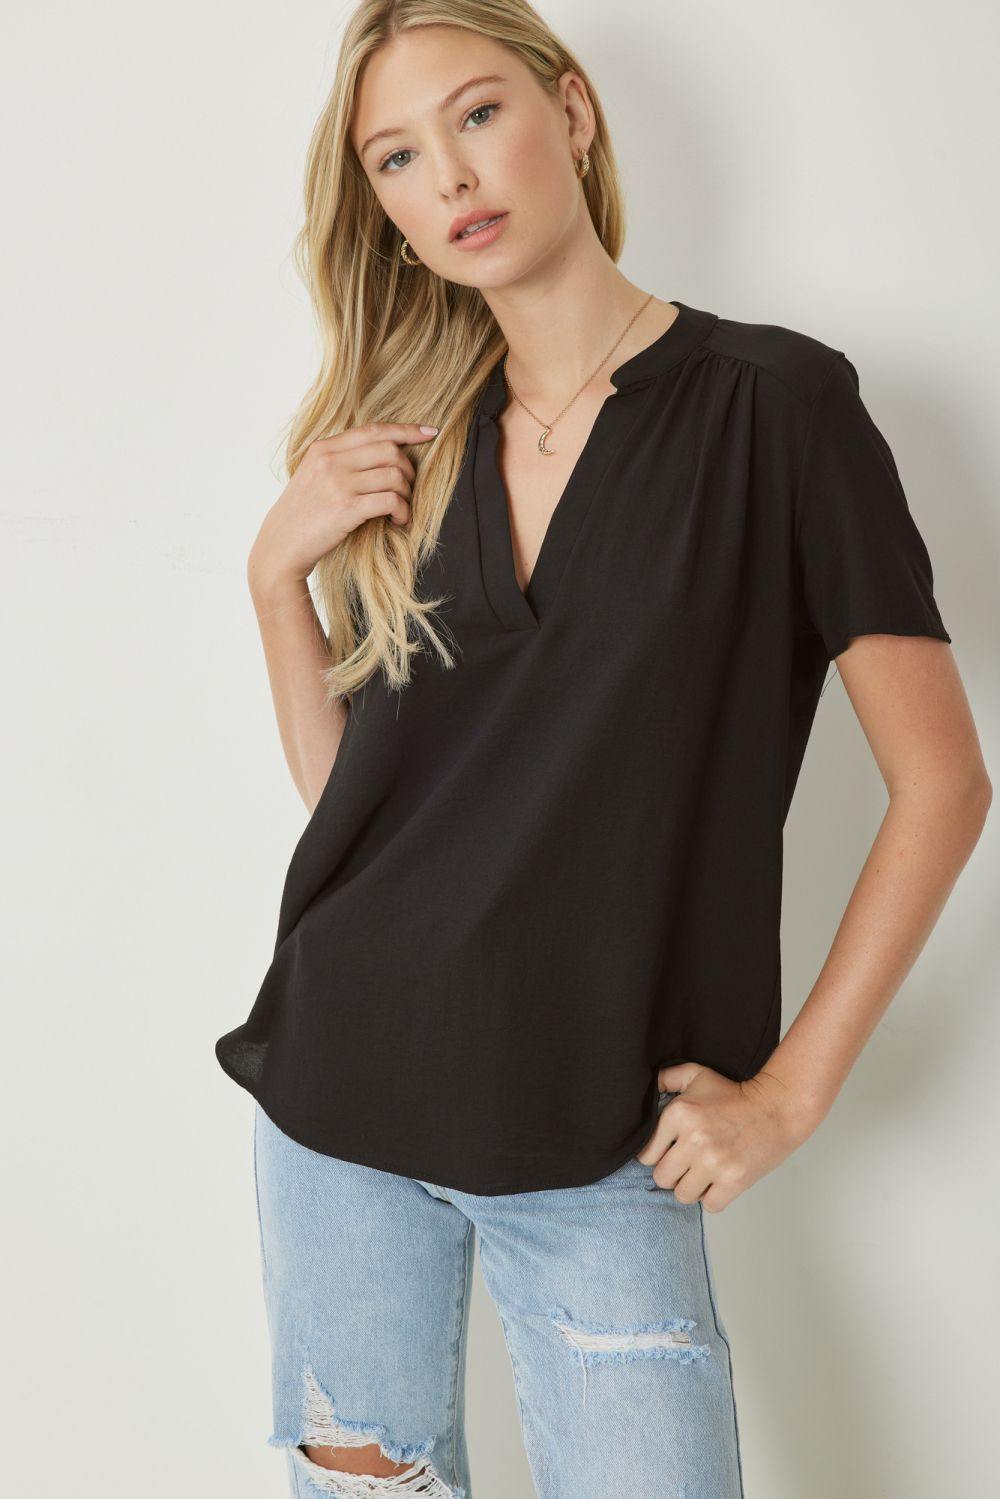 entro brand basic colorful tops Mock Collar Pleat Detailed black